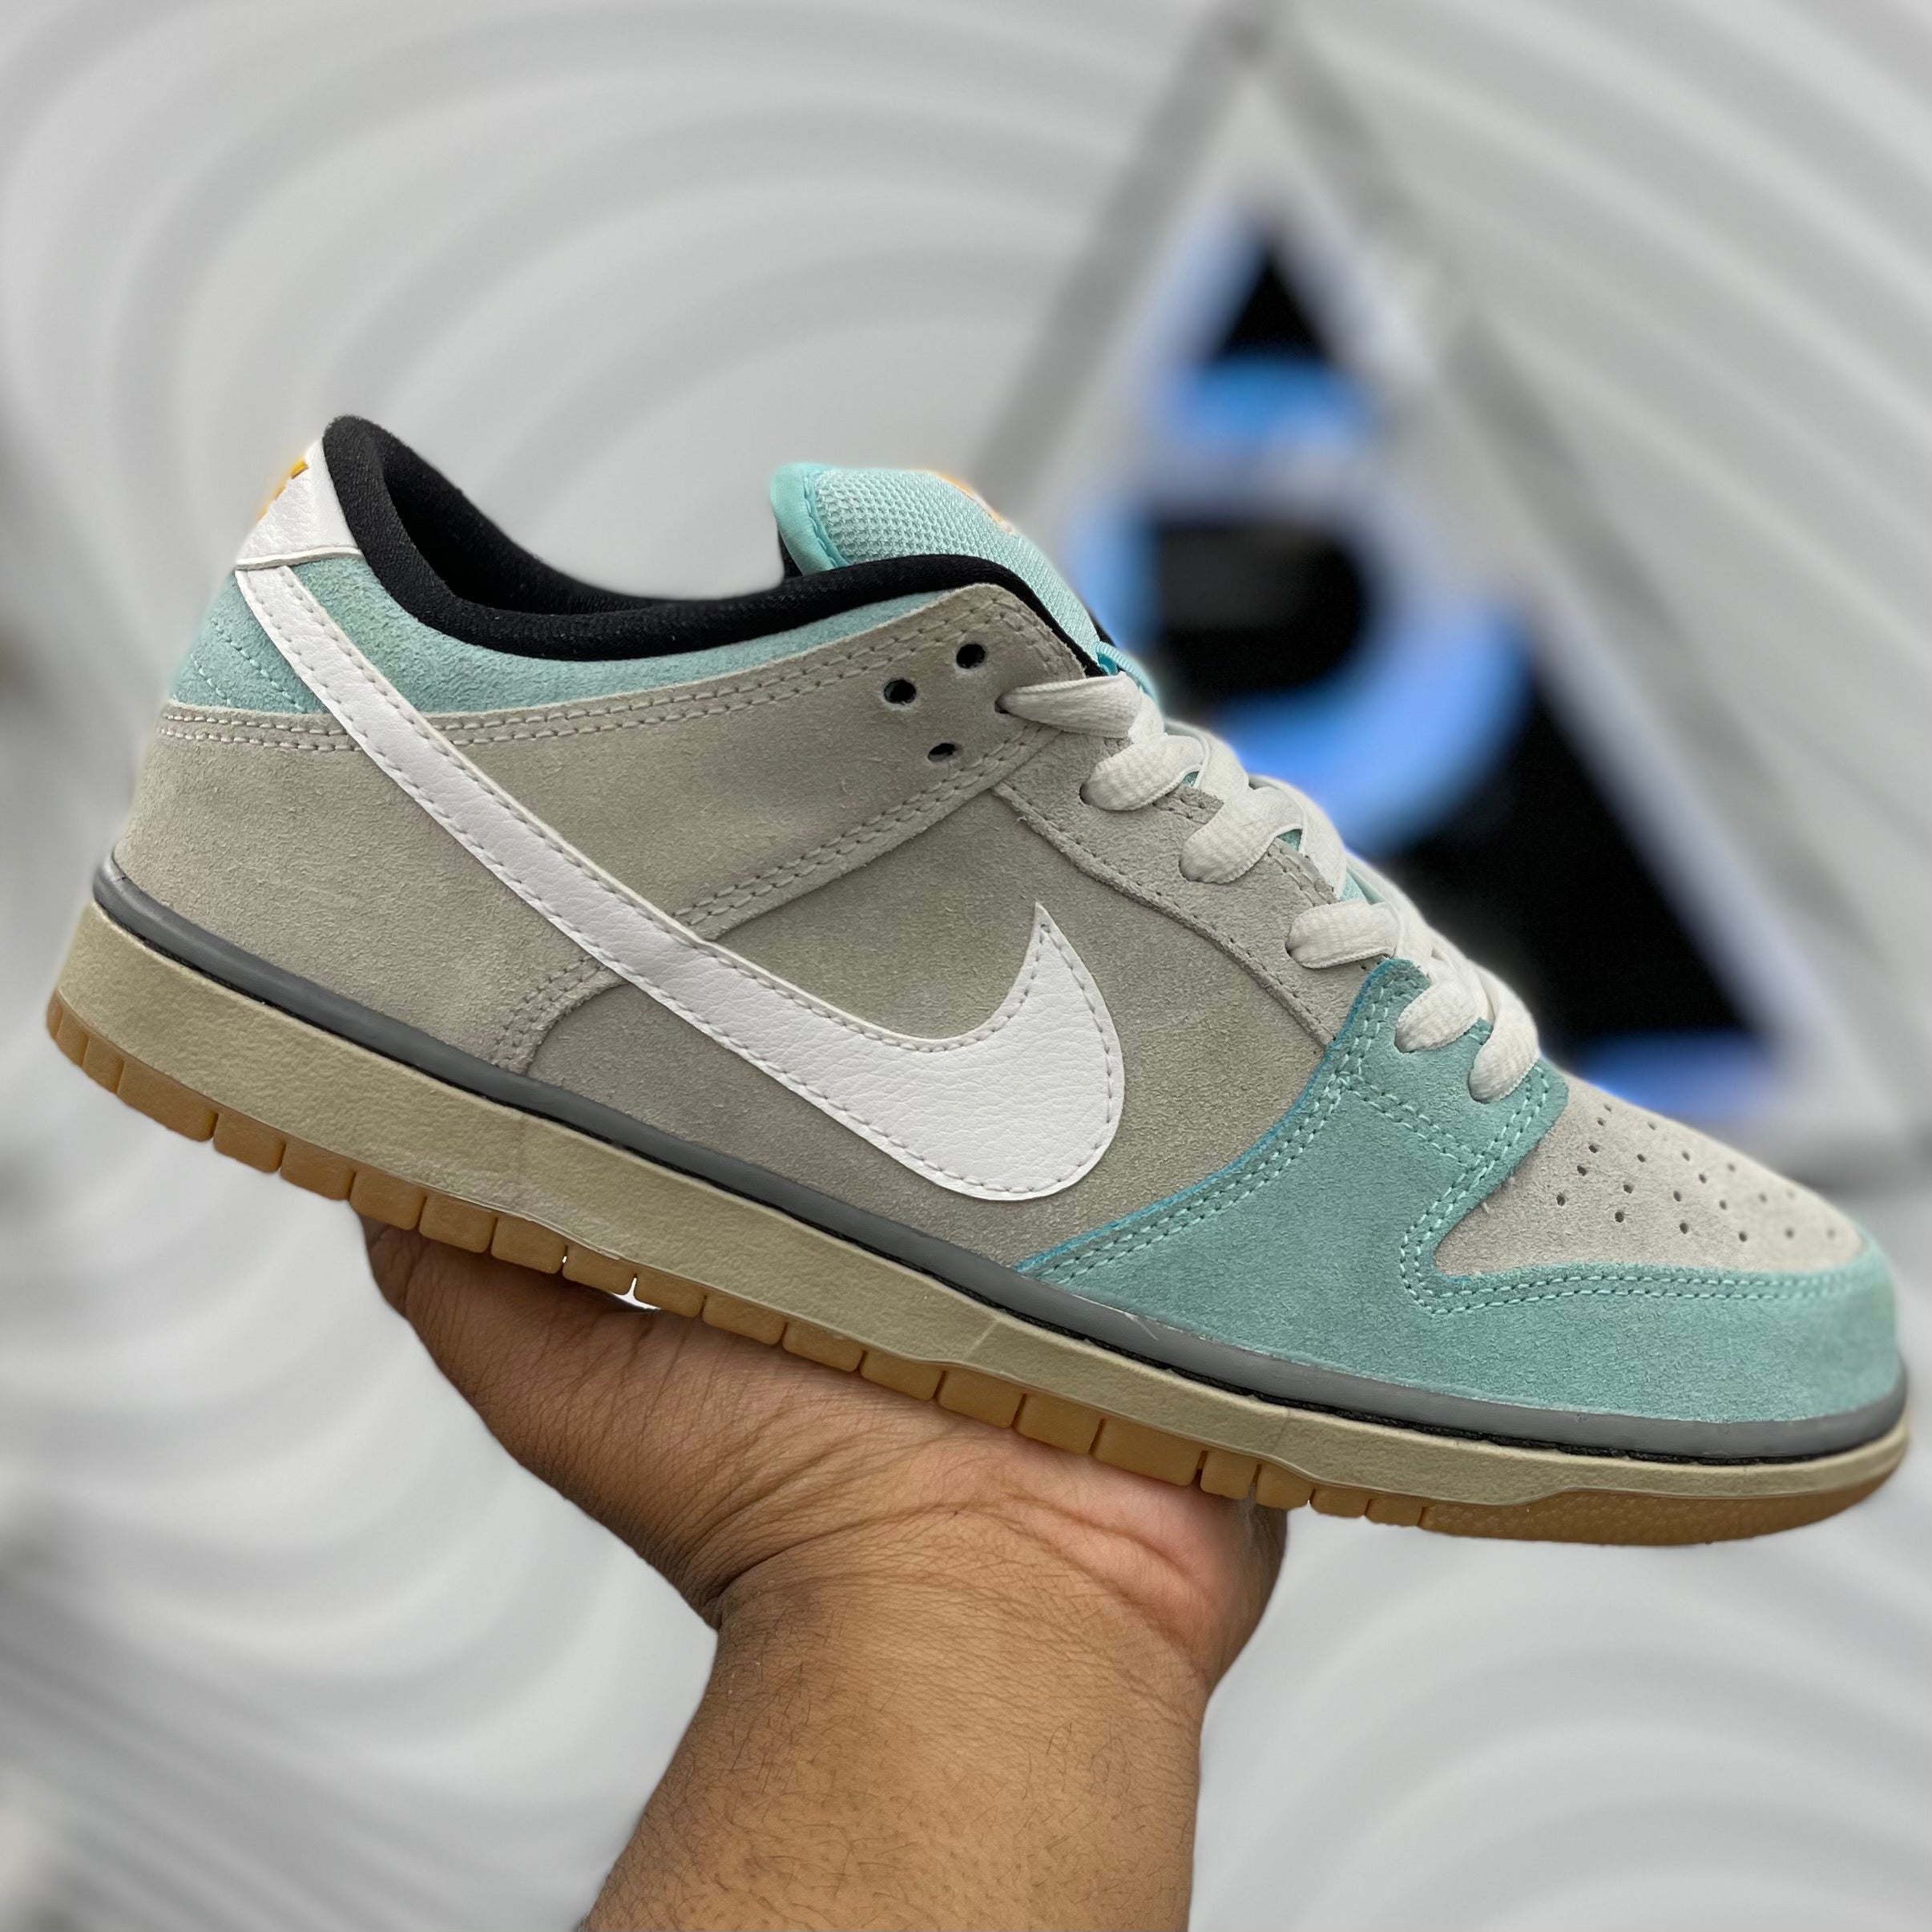 Nike SB Dunk Low “Gulf Of Mexico” | Request